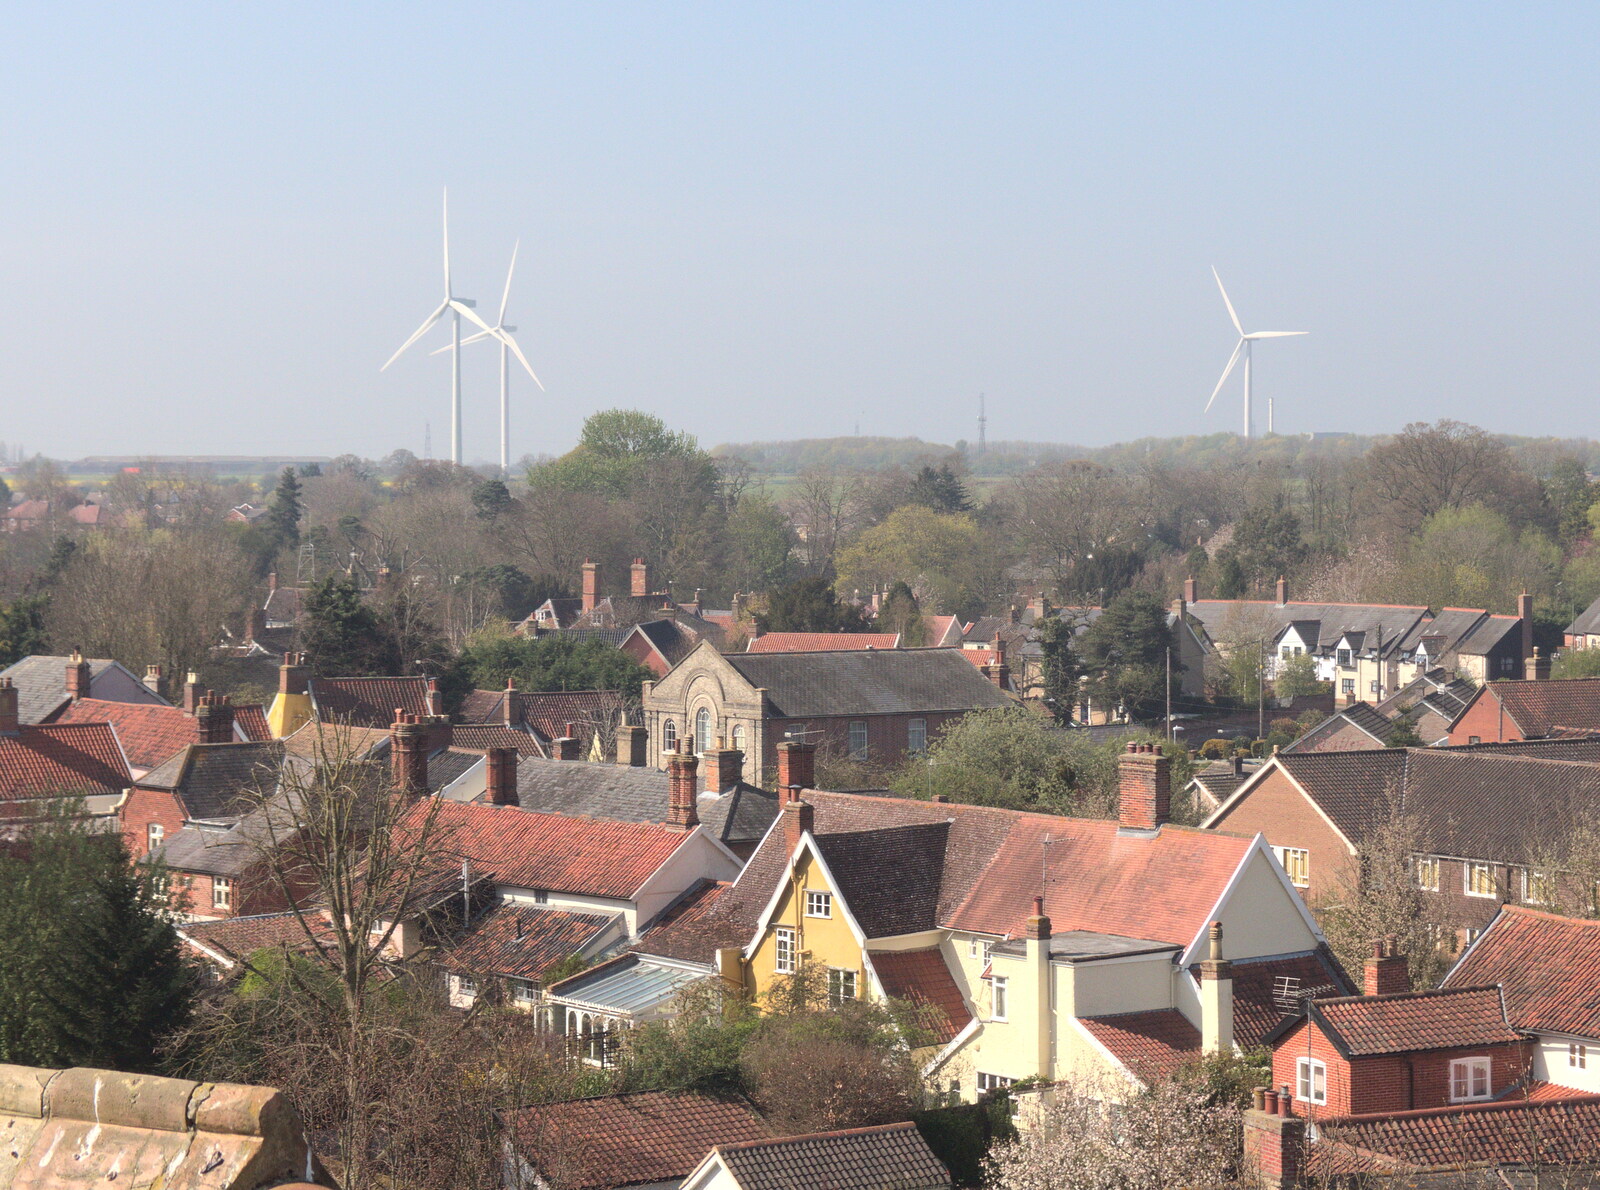 Wind turbines in the distance from Cycling to Bigod's Castle, Eye, Suffolk - 9th April 2017